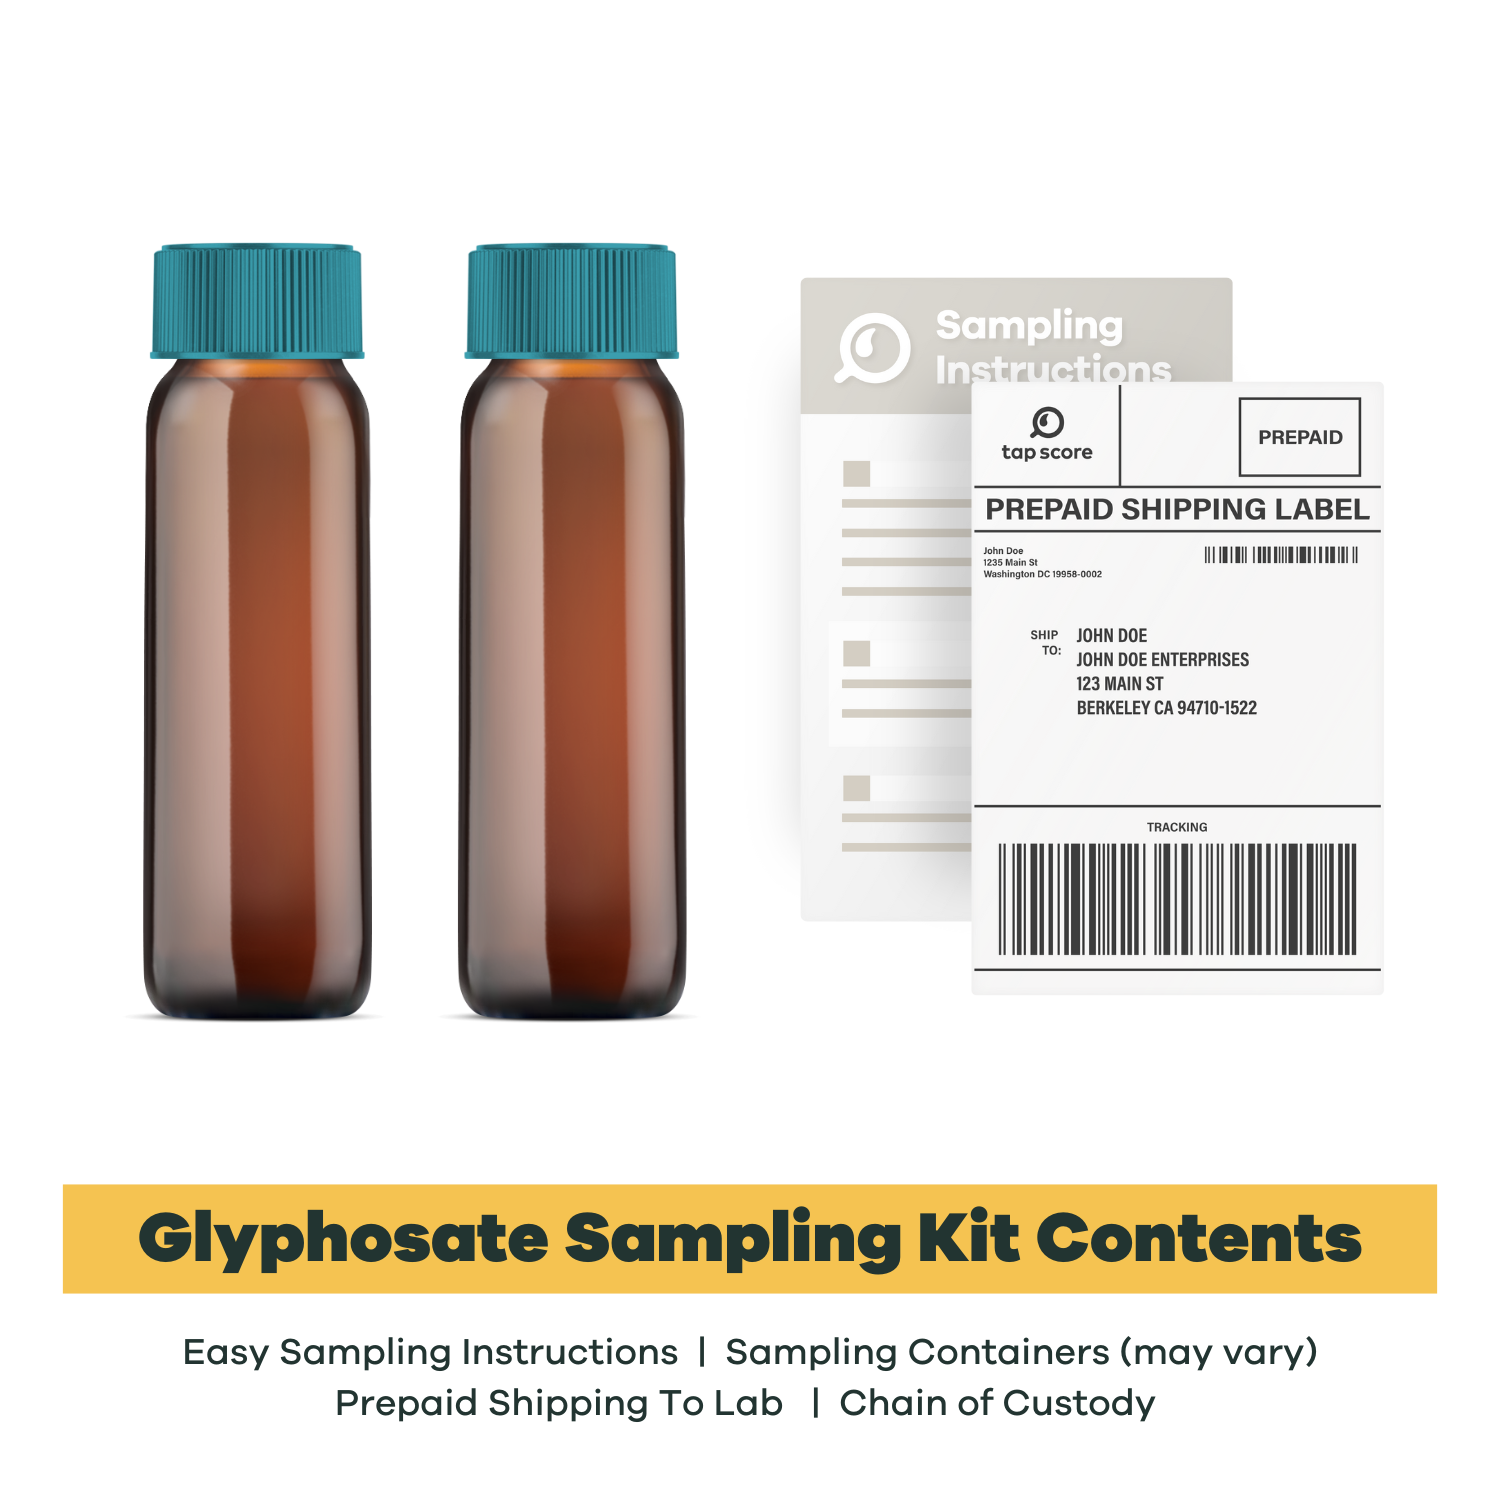 Lab Test Kit contents for Glyphosate in Drinking Water - Tap Score